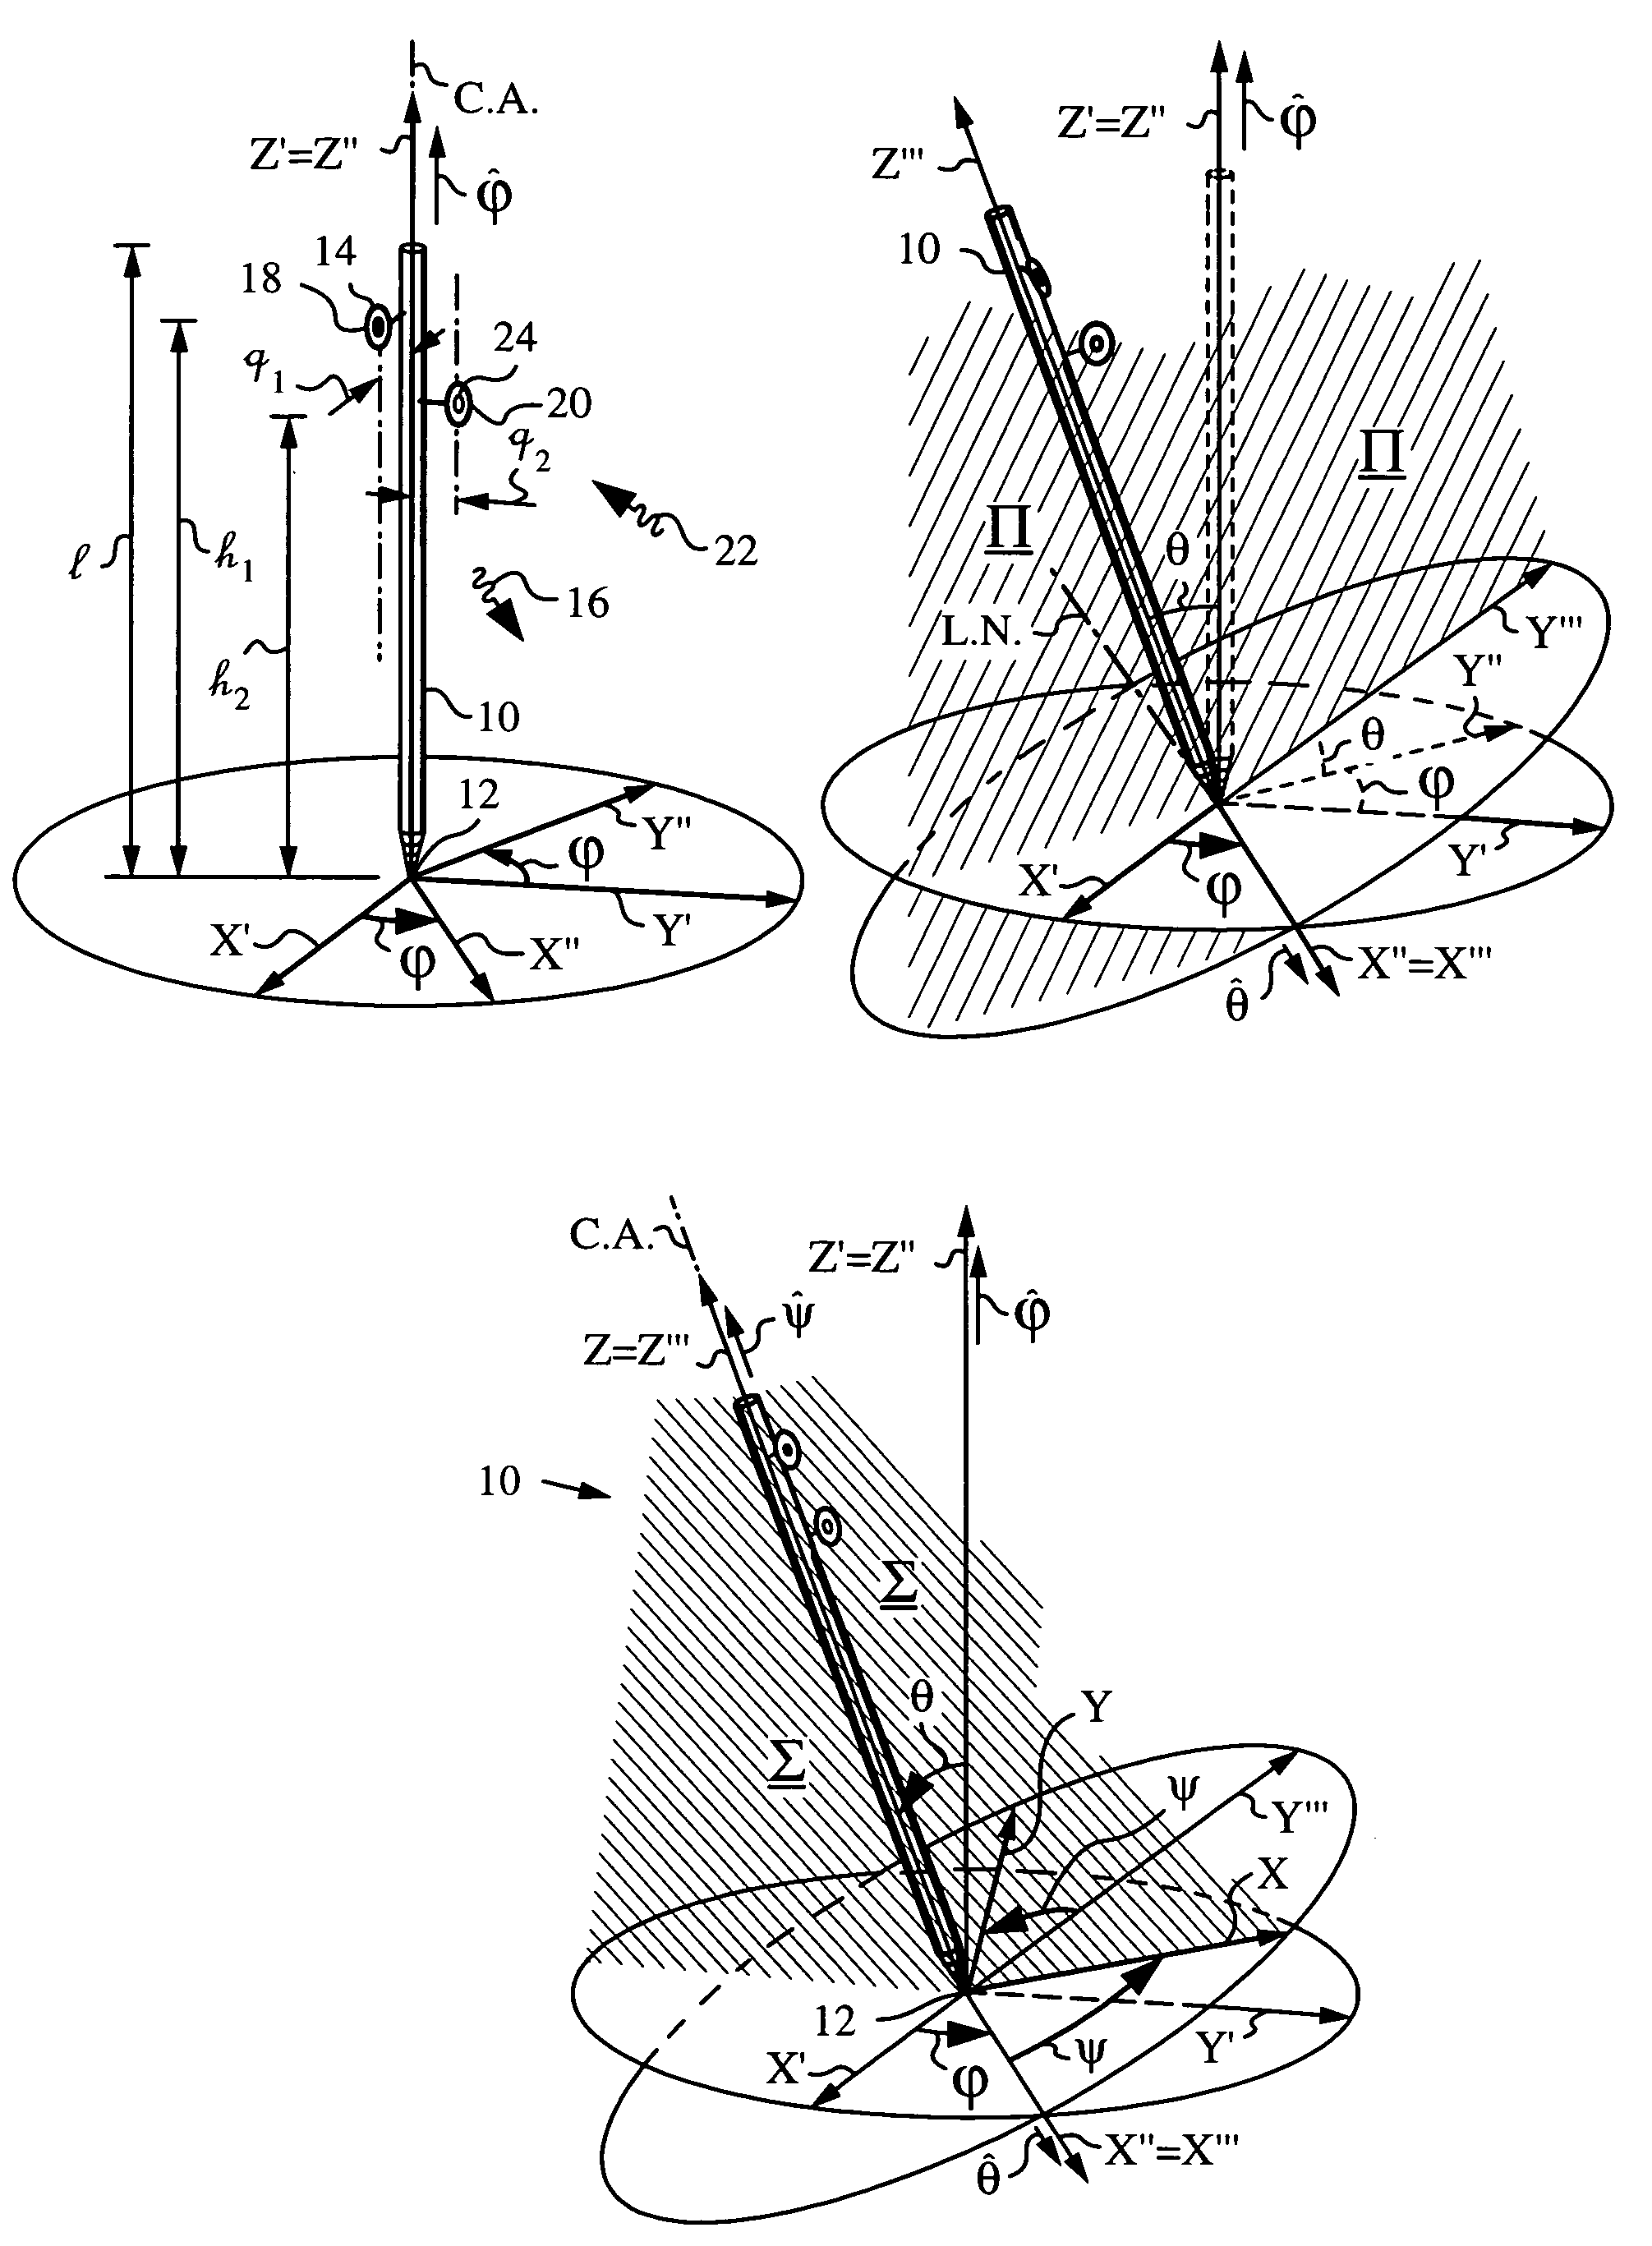 Apparatus and method for determining orientation parameters of an elongate object